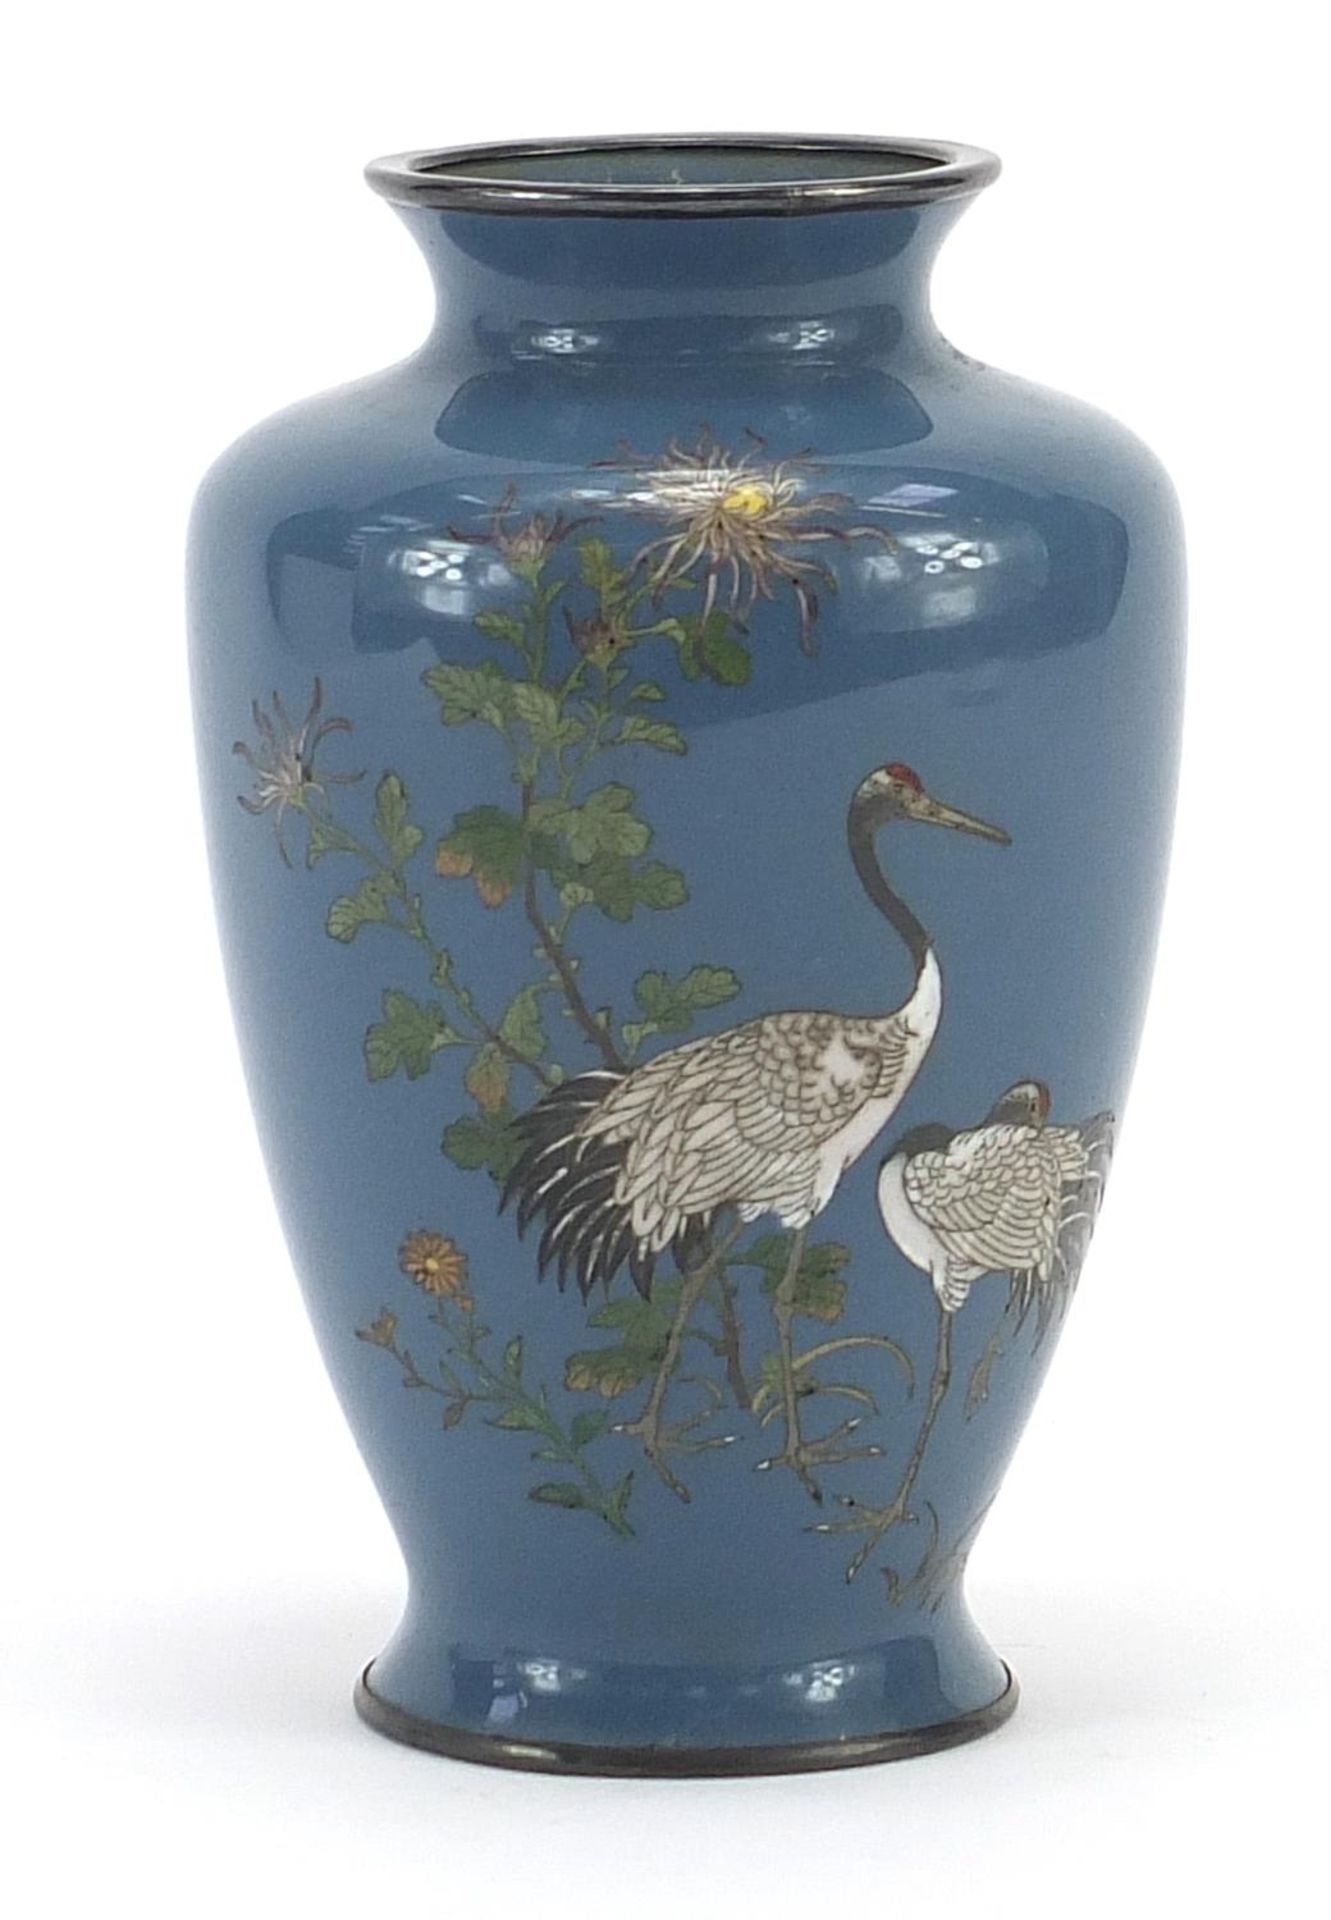 Japanese silver mounted cloisonne vase decorated with cranes and flowers, 12cm high